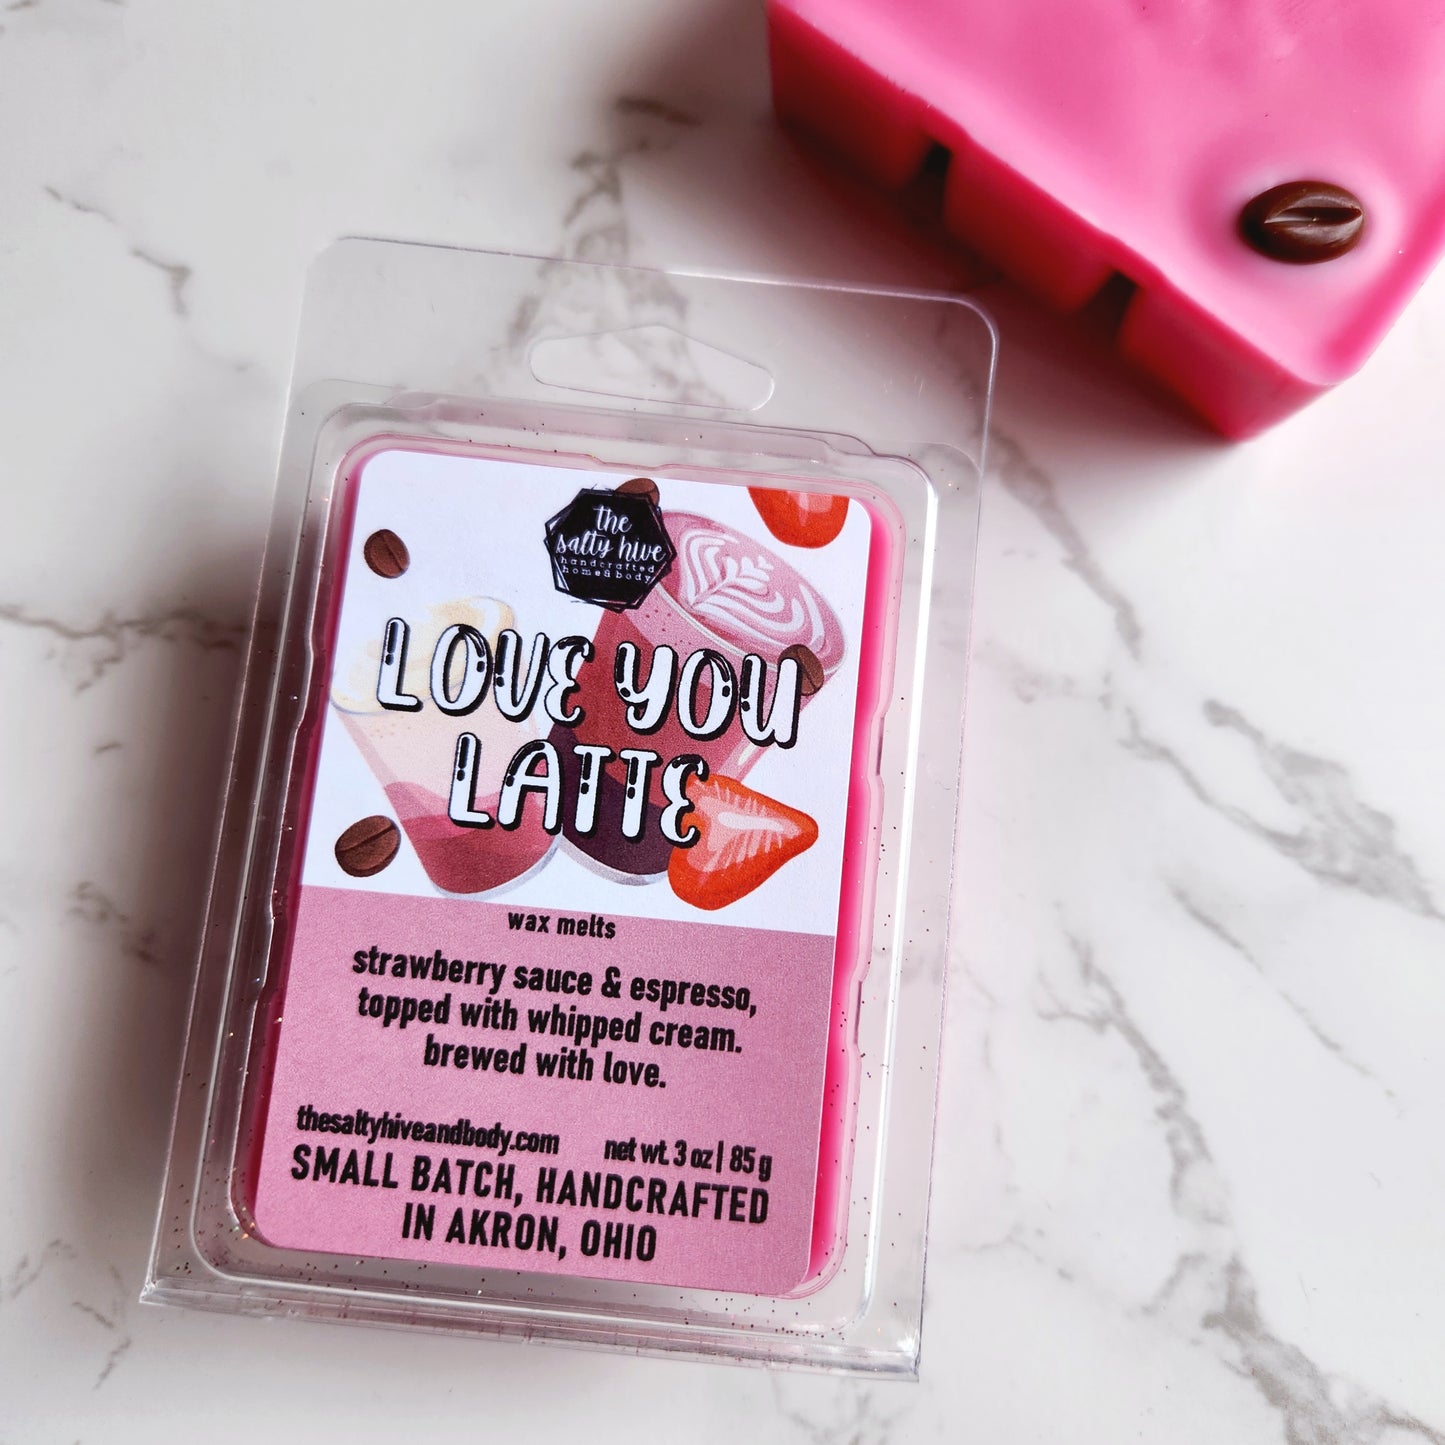 love you latte wax melts - the salty hive